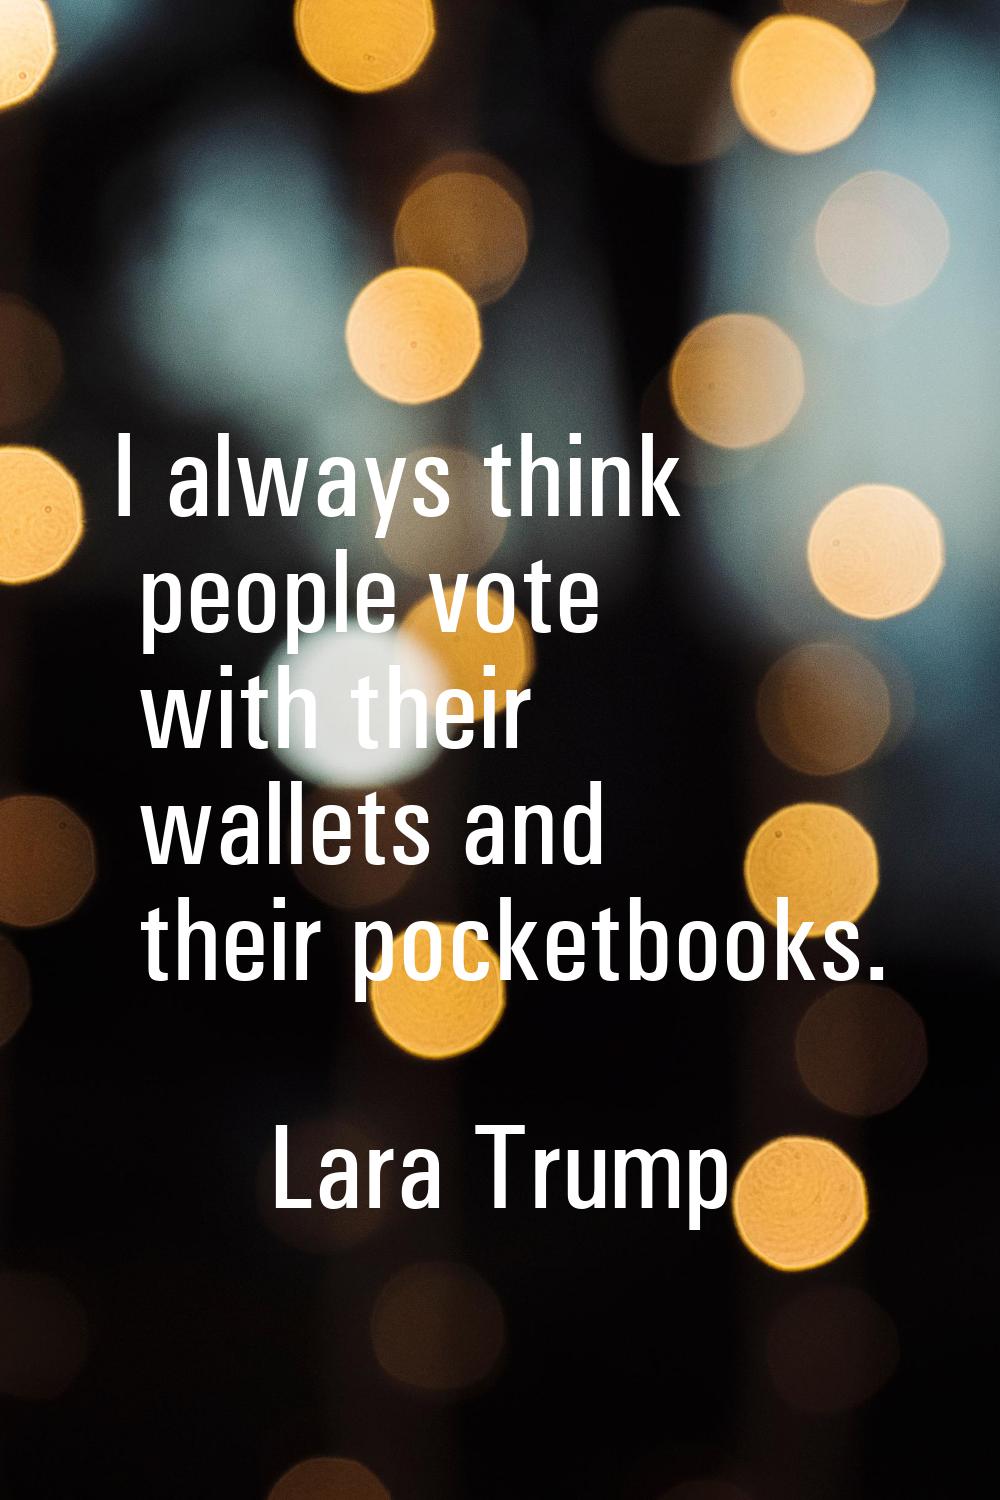 I always think people vote with their wallets and their pocketbooks.